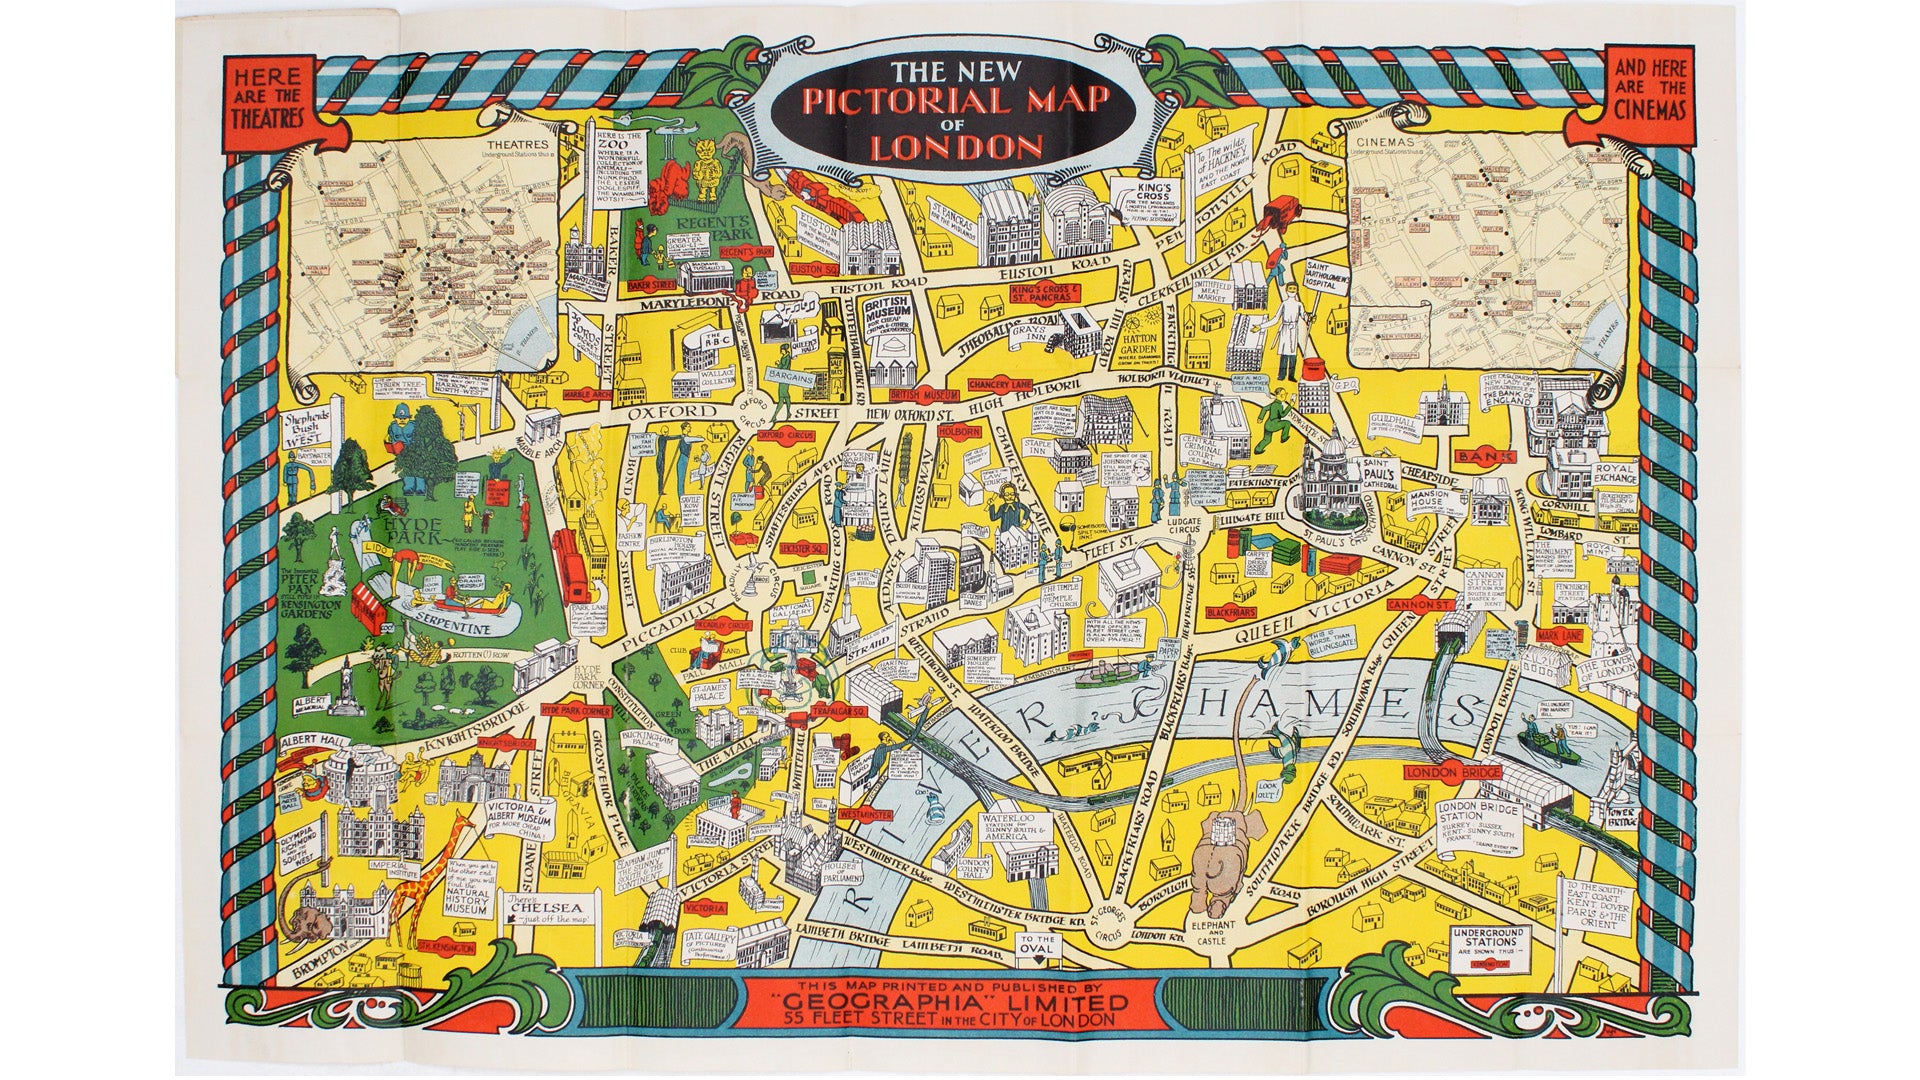 The New Pictorial Map of London